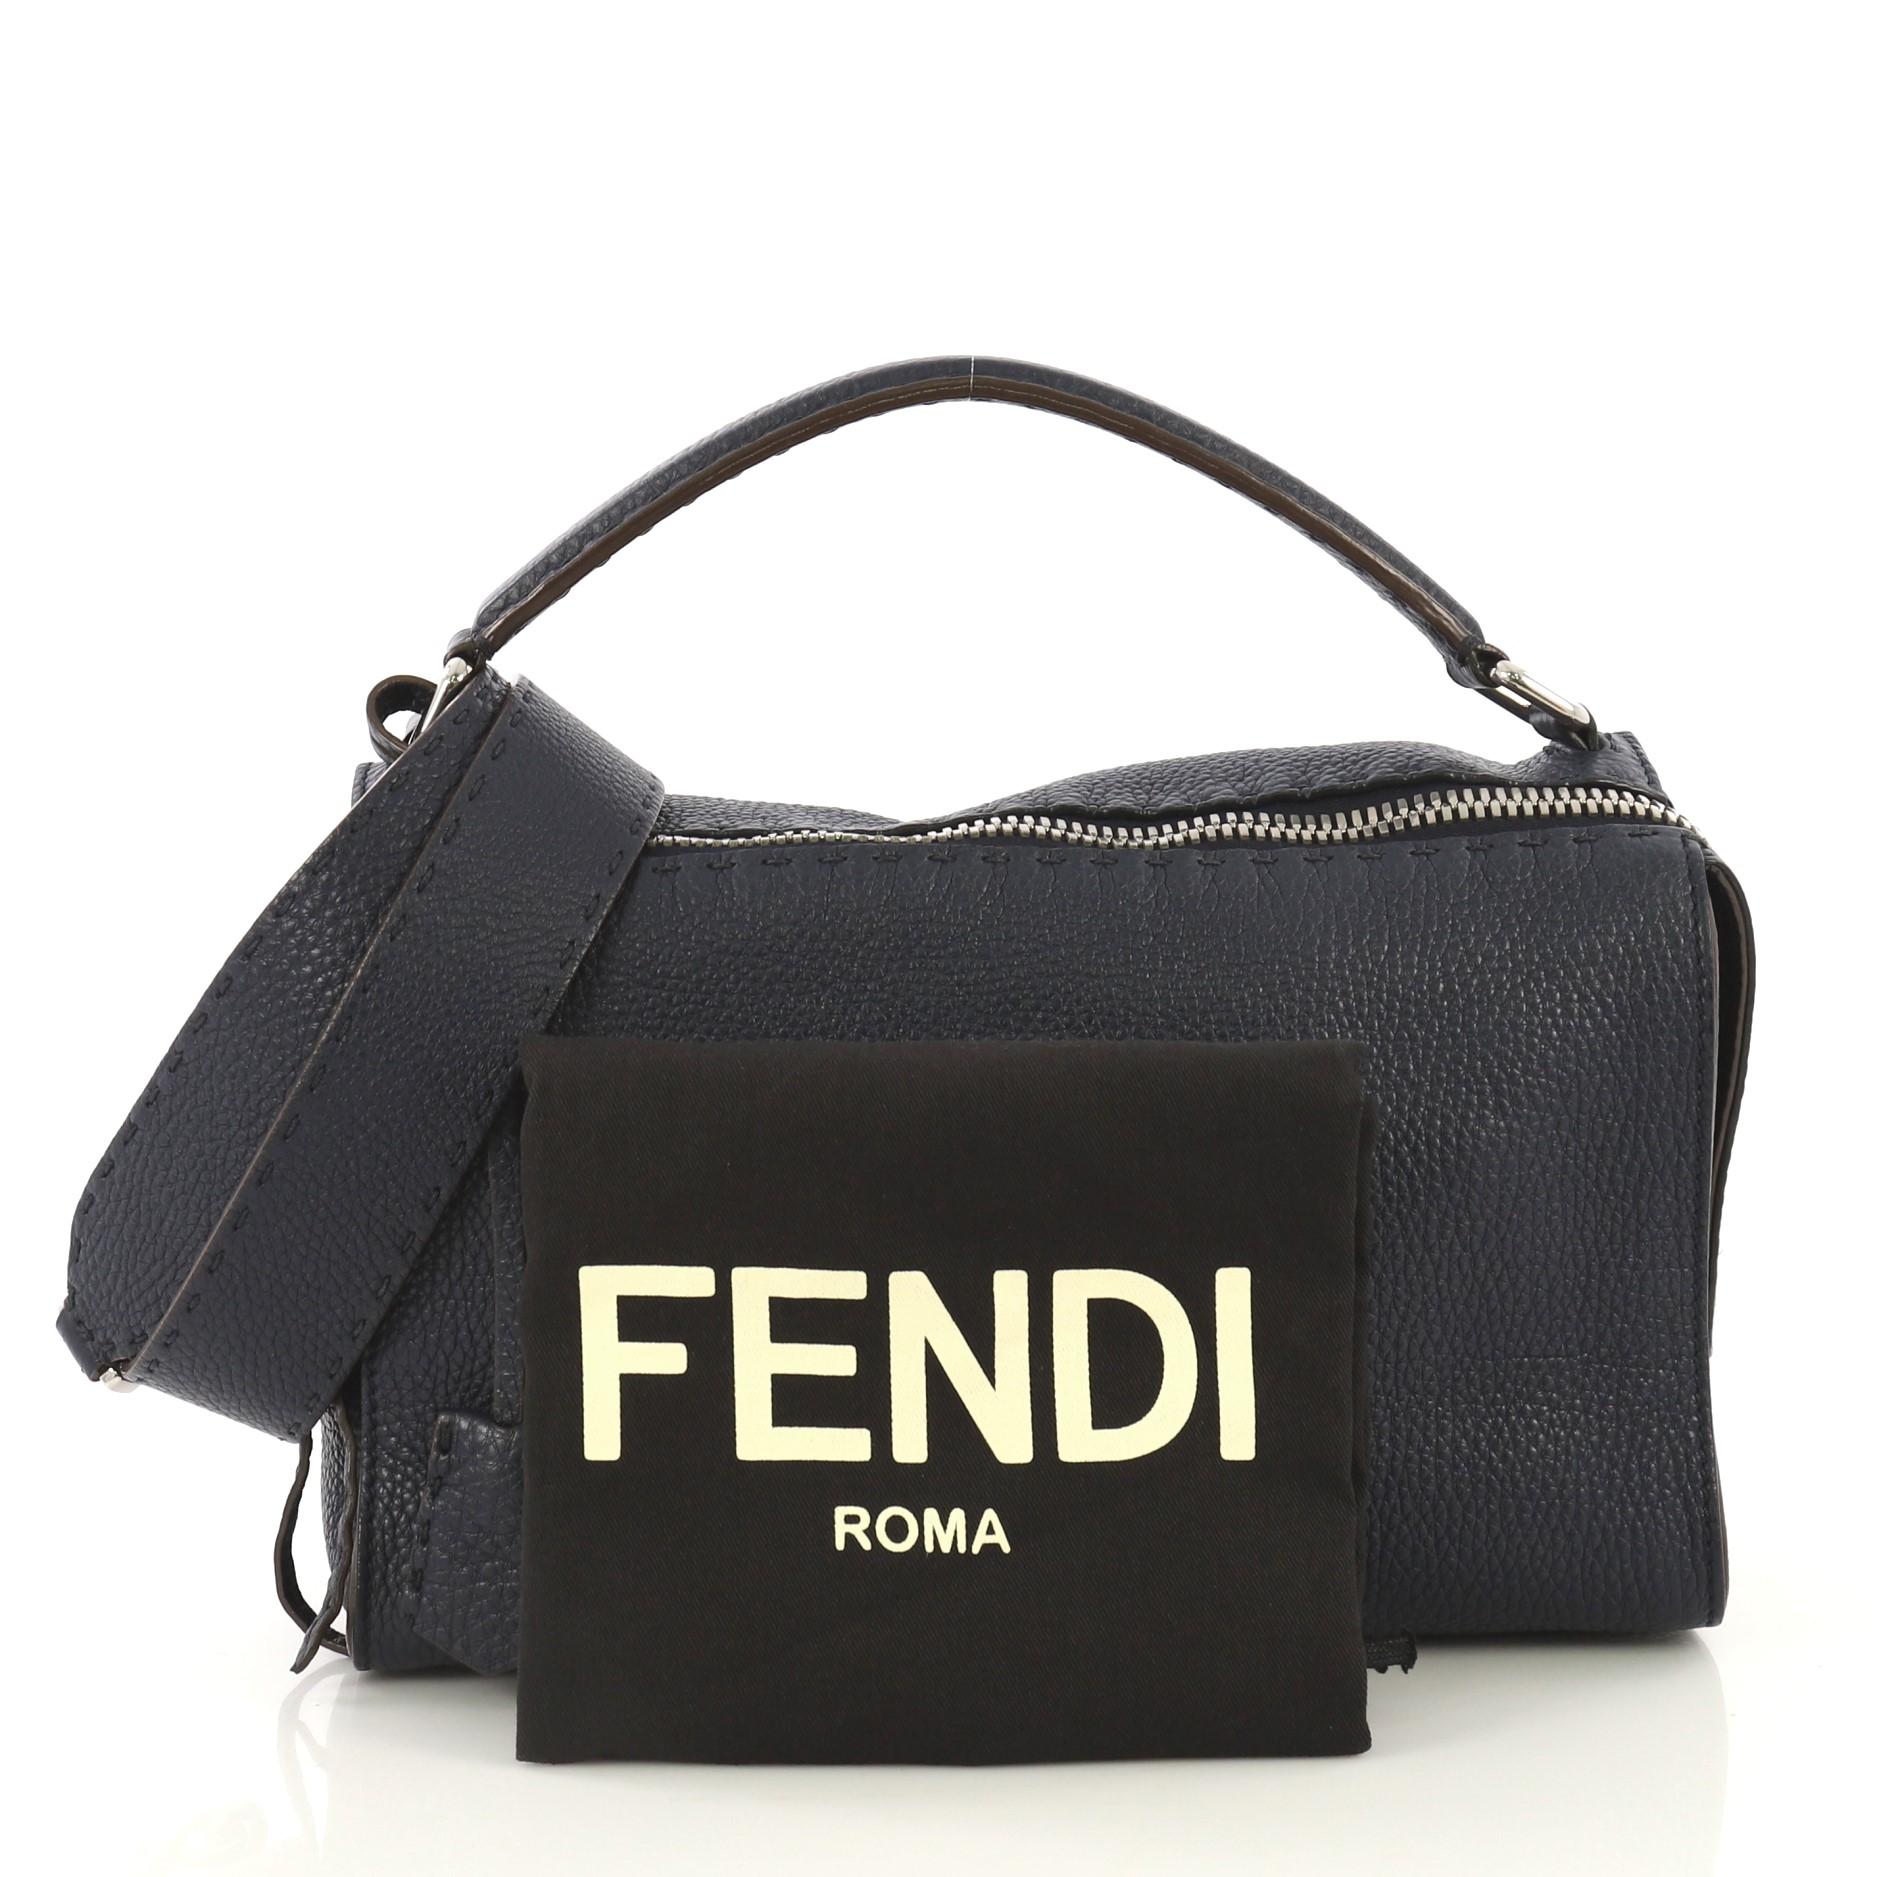 This Fendi Selleria Lei Bag Leather, crafted from blue leather, features looping leather handles and silver-tone hardware. Its zip closure opens to a blue microfiber interior with zip and slip pockets. 

Estimated Retail Price: $2,700
Condition: